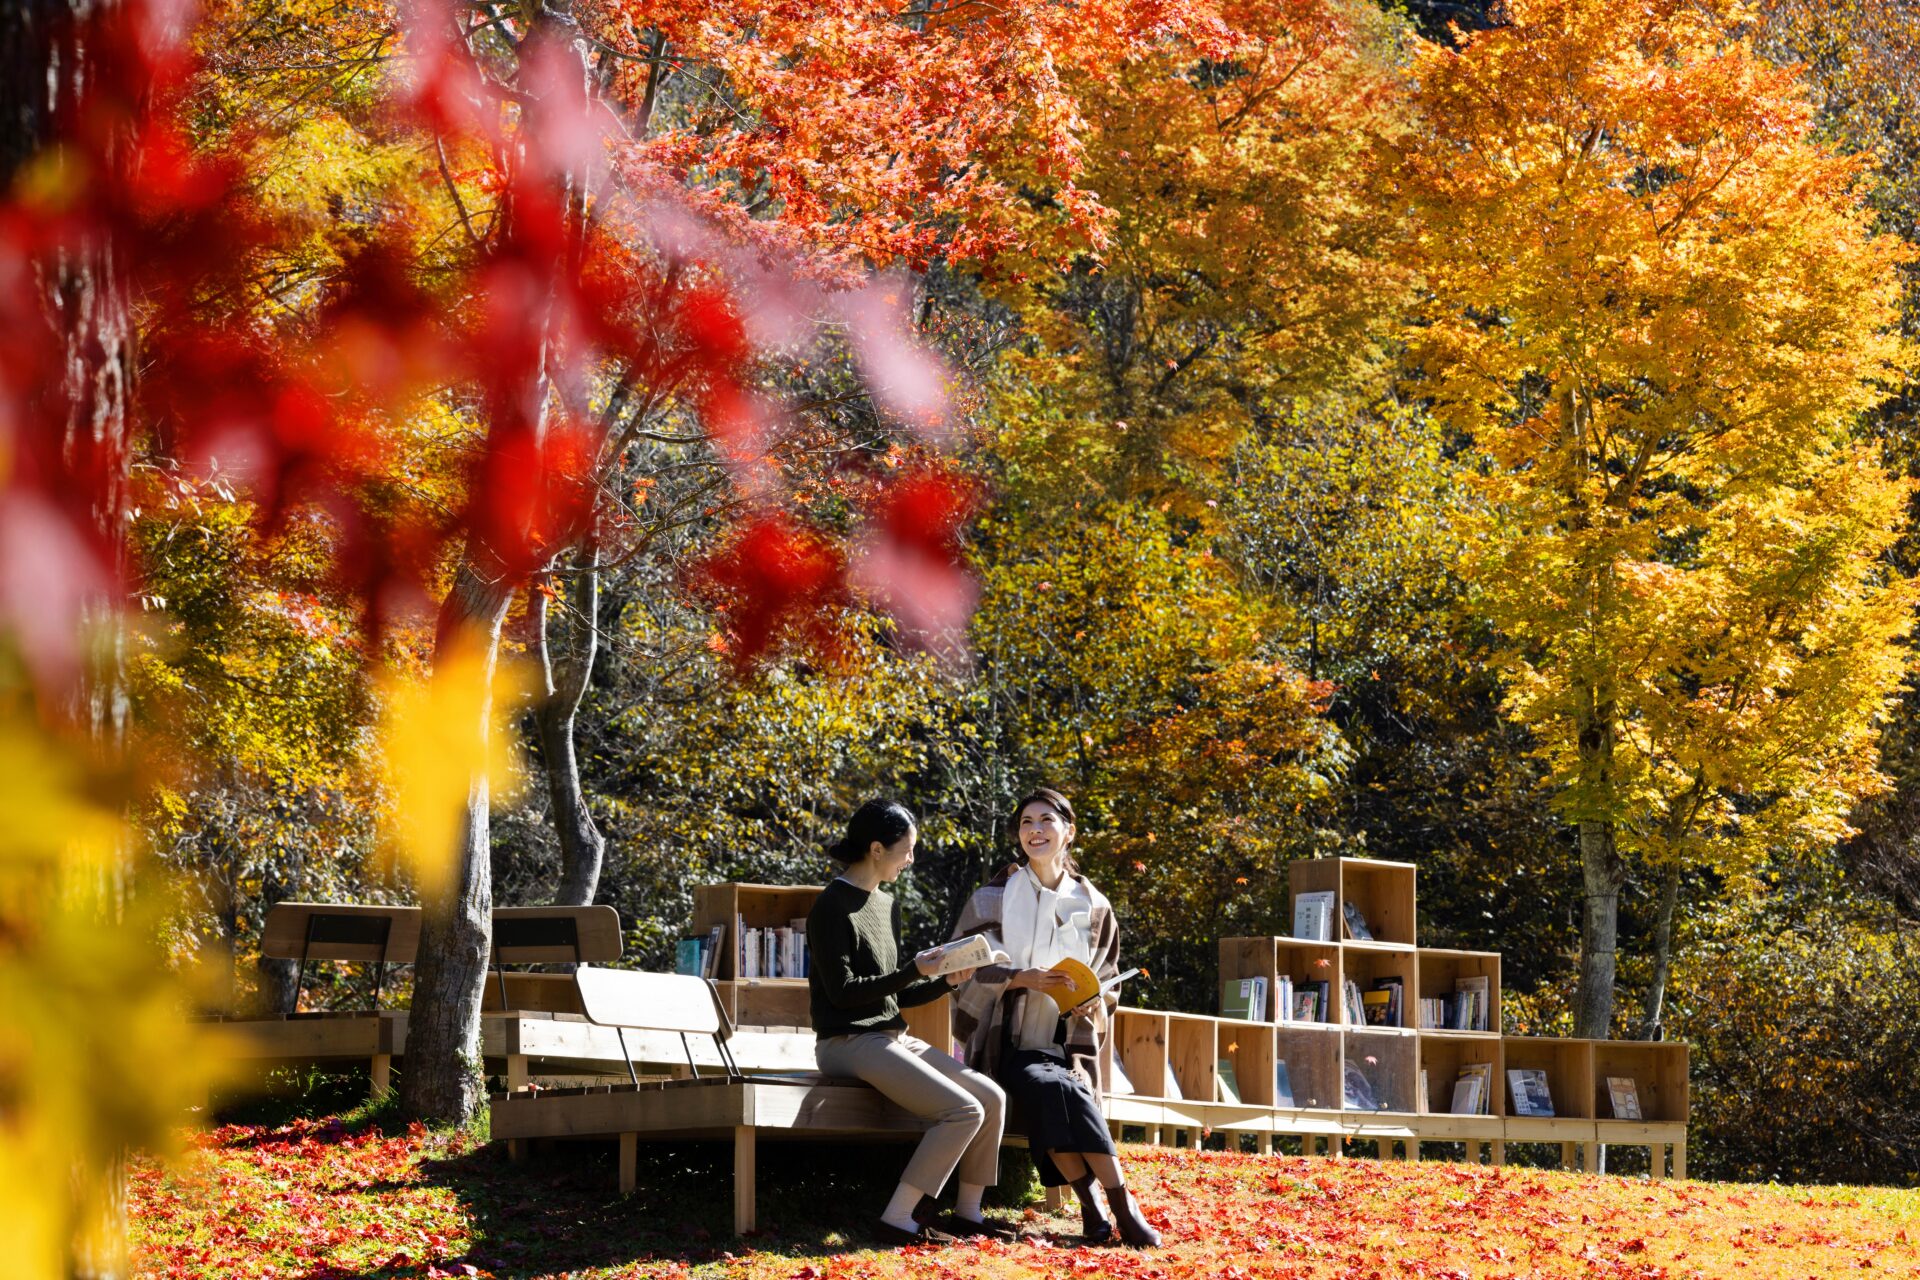 ``Autumn Leaves Library'' where you can relax under the clear autumn sky